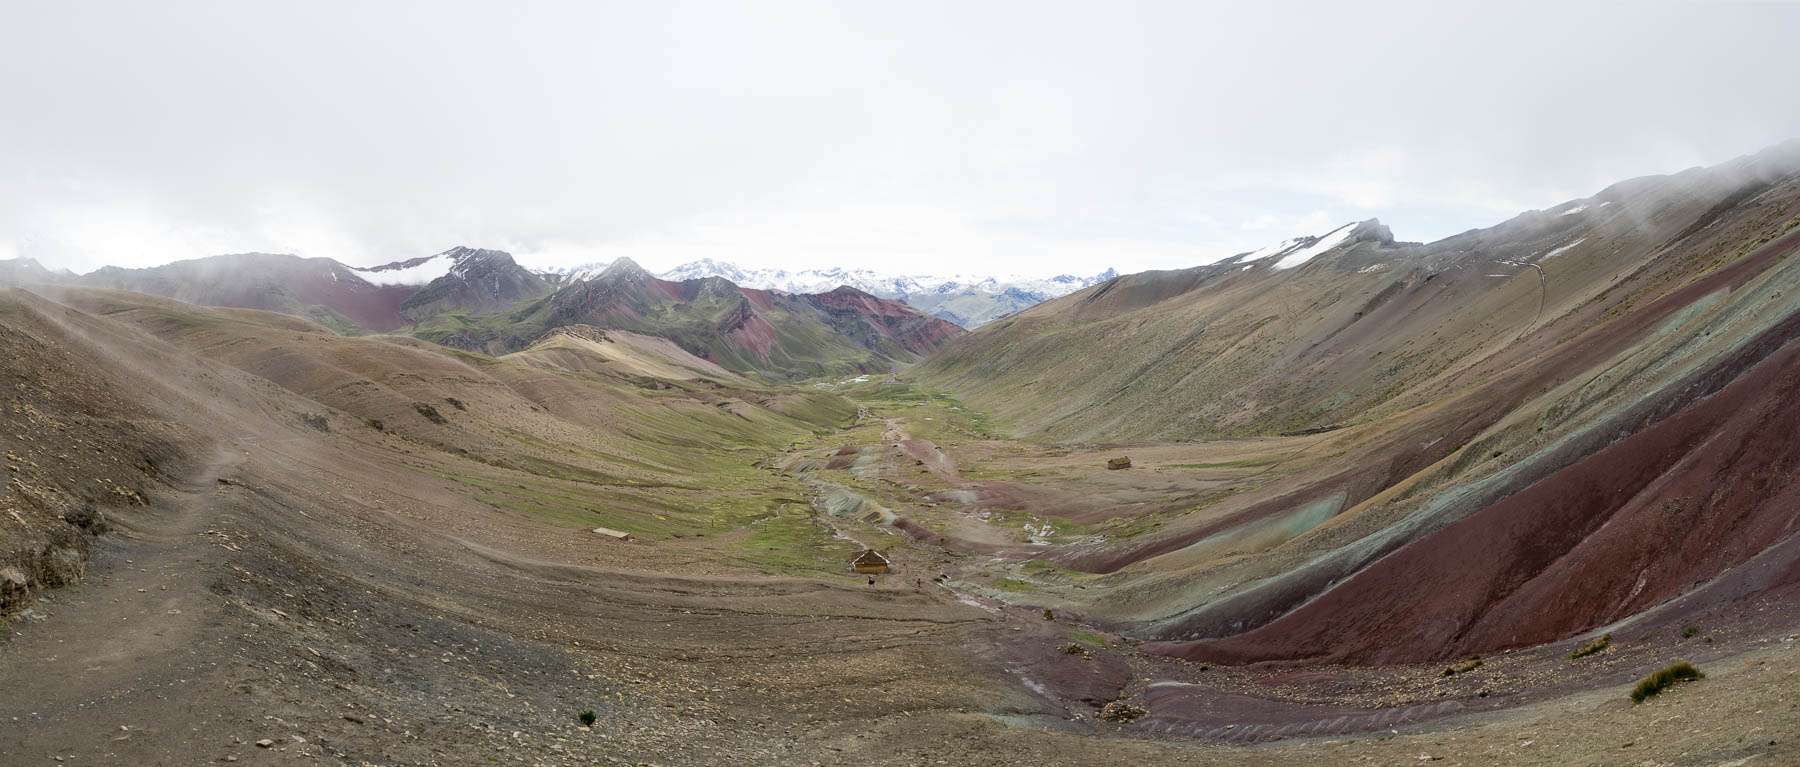 Looking east from Vinicunca